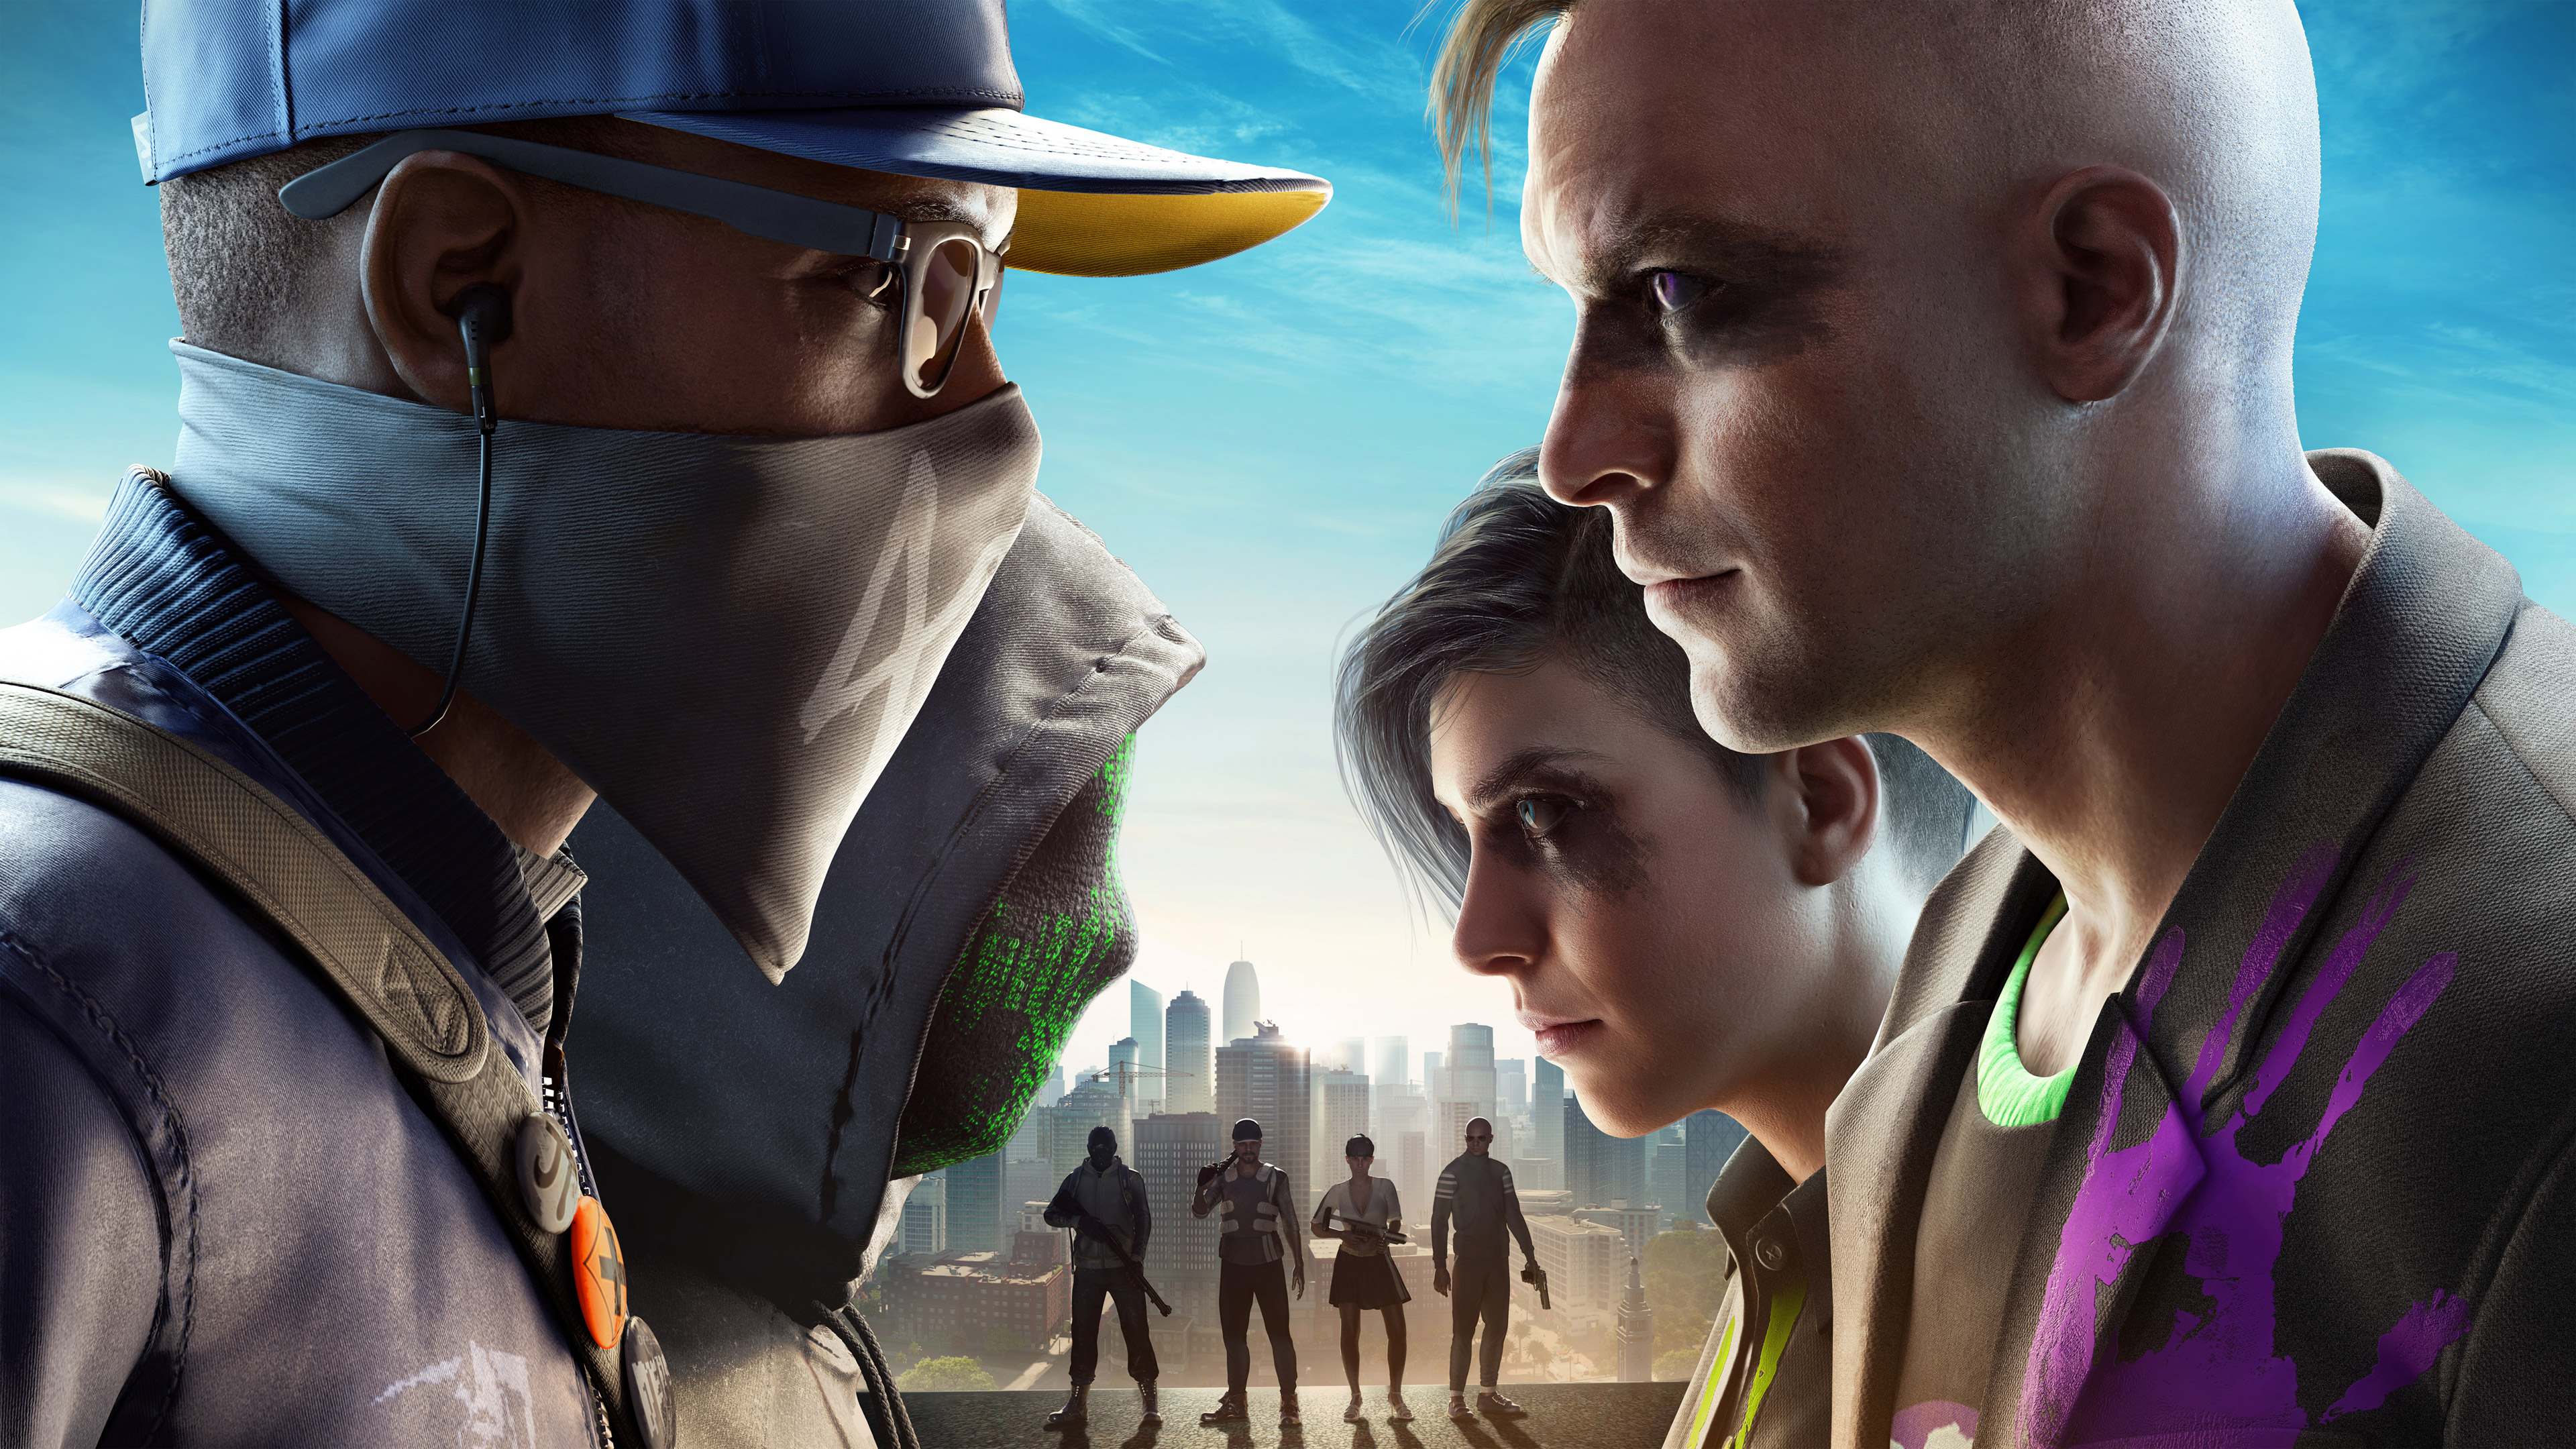 watch dogs 2 wallpaper 4k,action adventure game,adventure game,animation,games,human